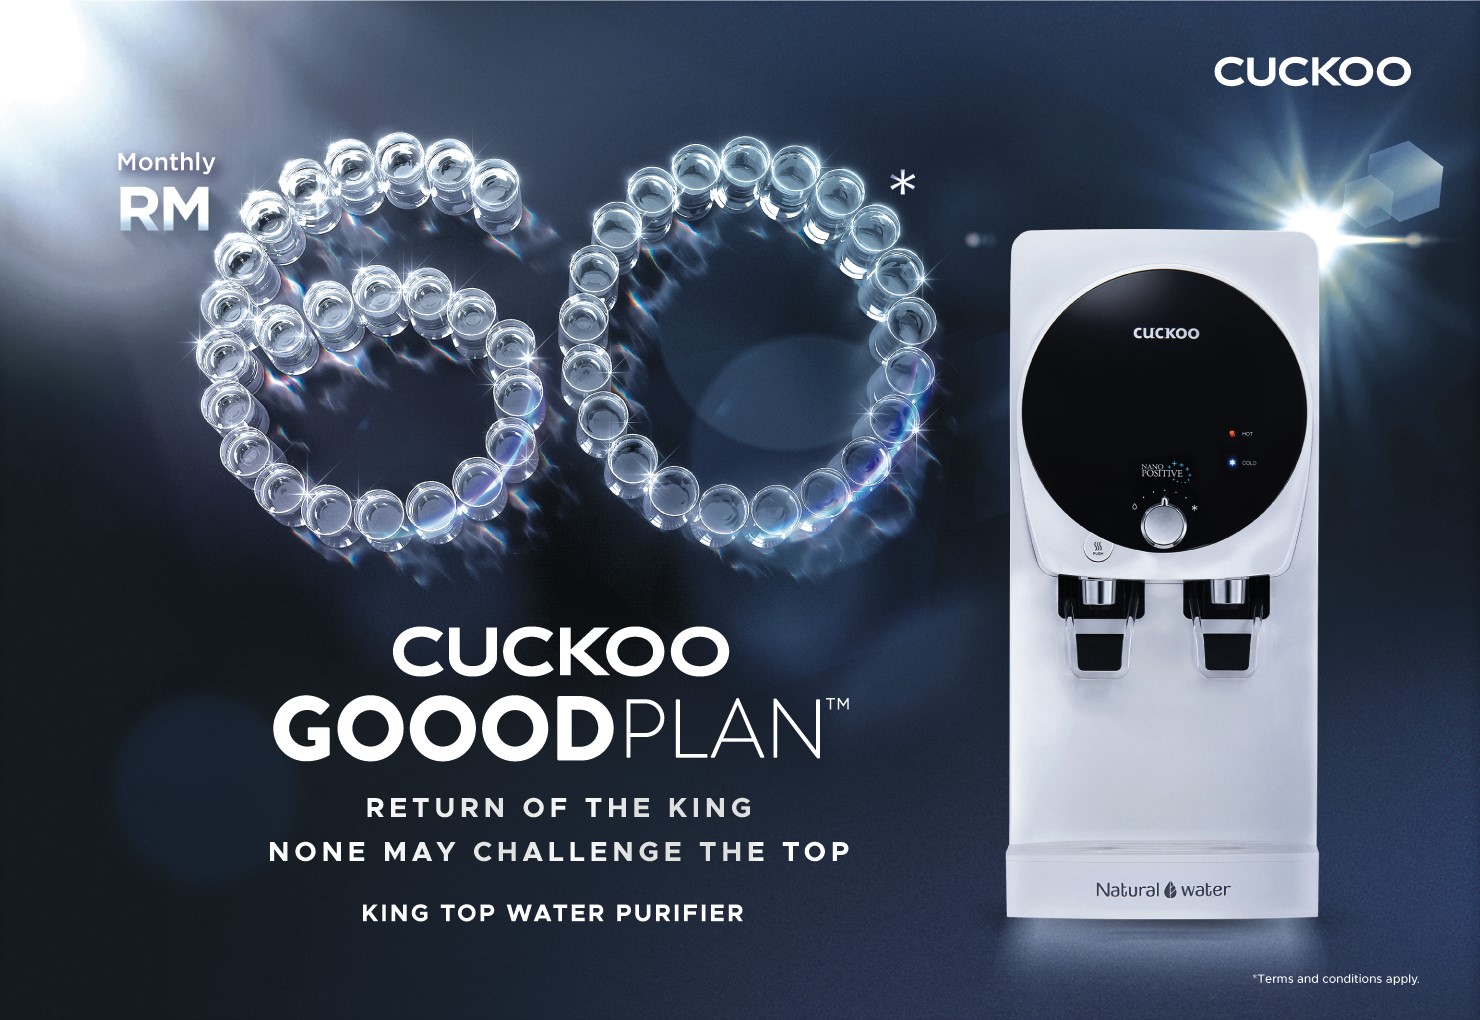 Cuckoo Gooodplan Returns With Rm60 Per Month Offer For King Top Water Purifier